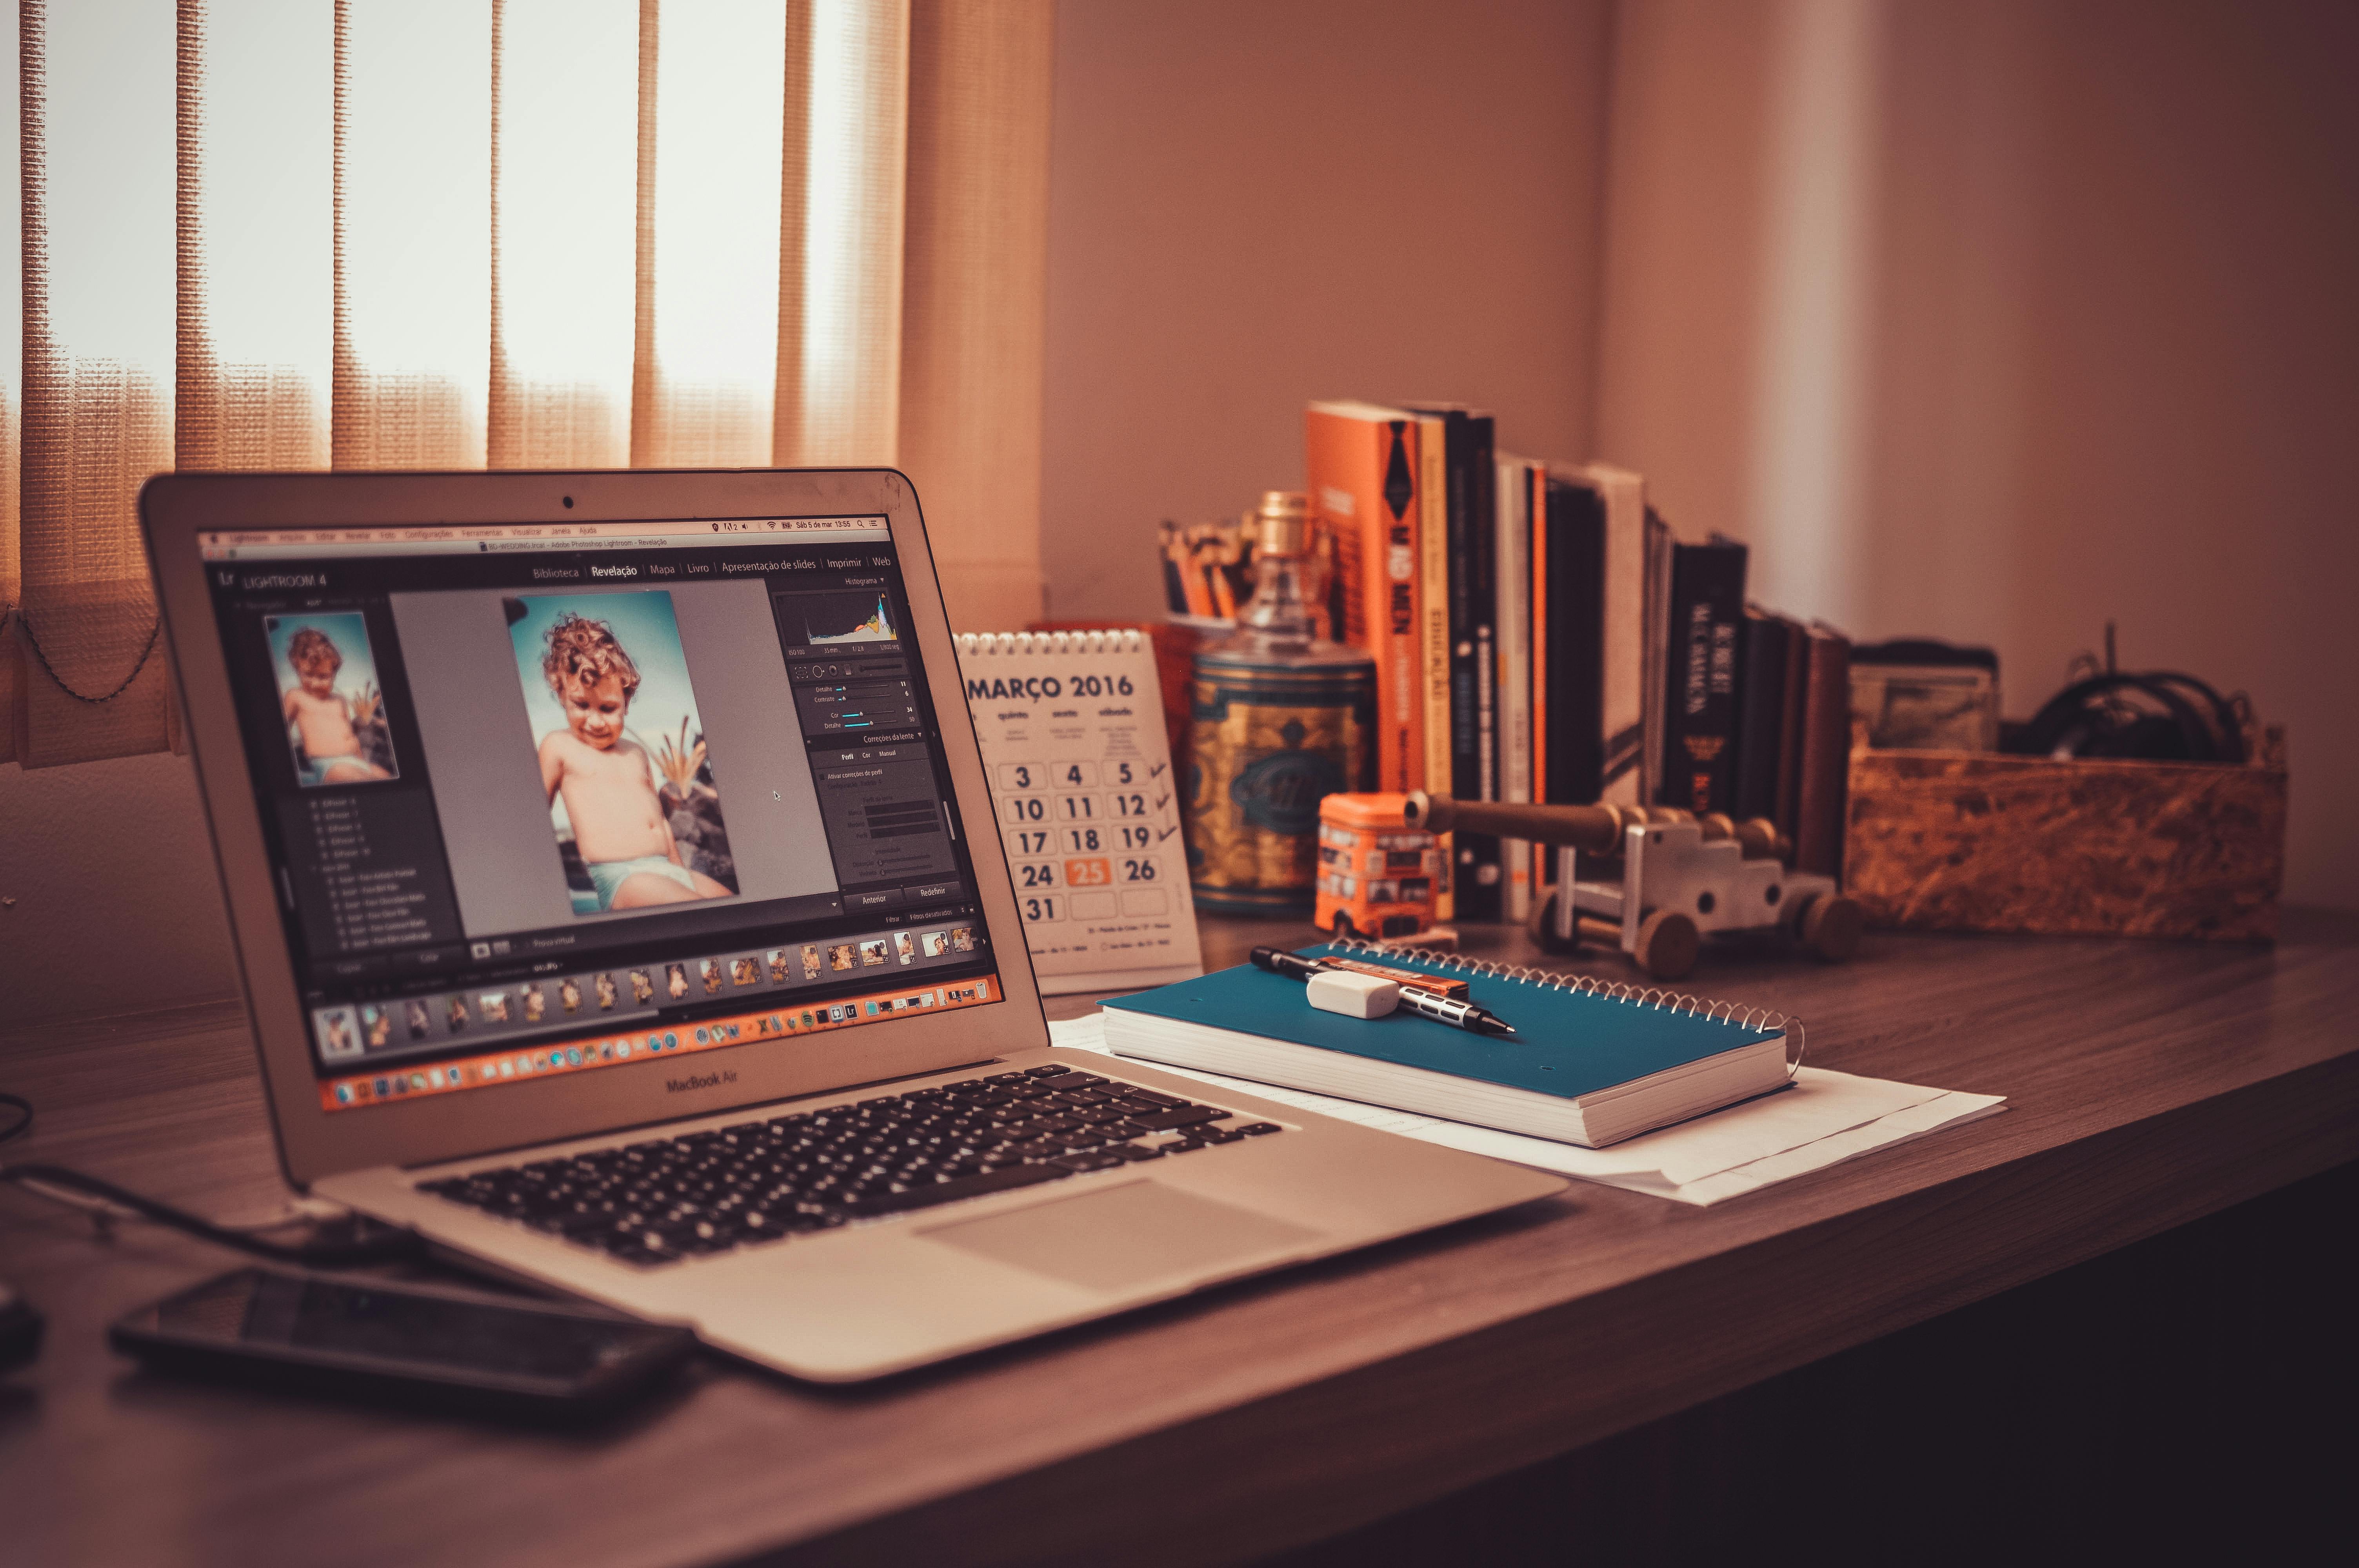 Photoshop Photos, Download The BEST Free Photoshop Stock Photos & HD Images